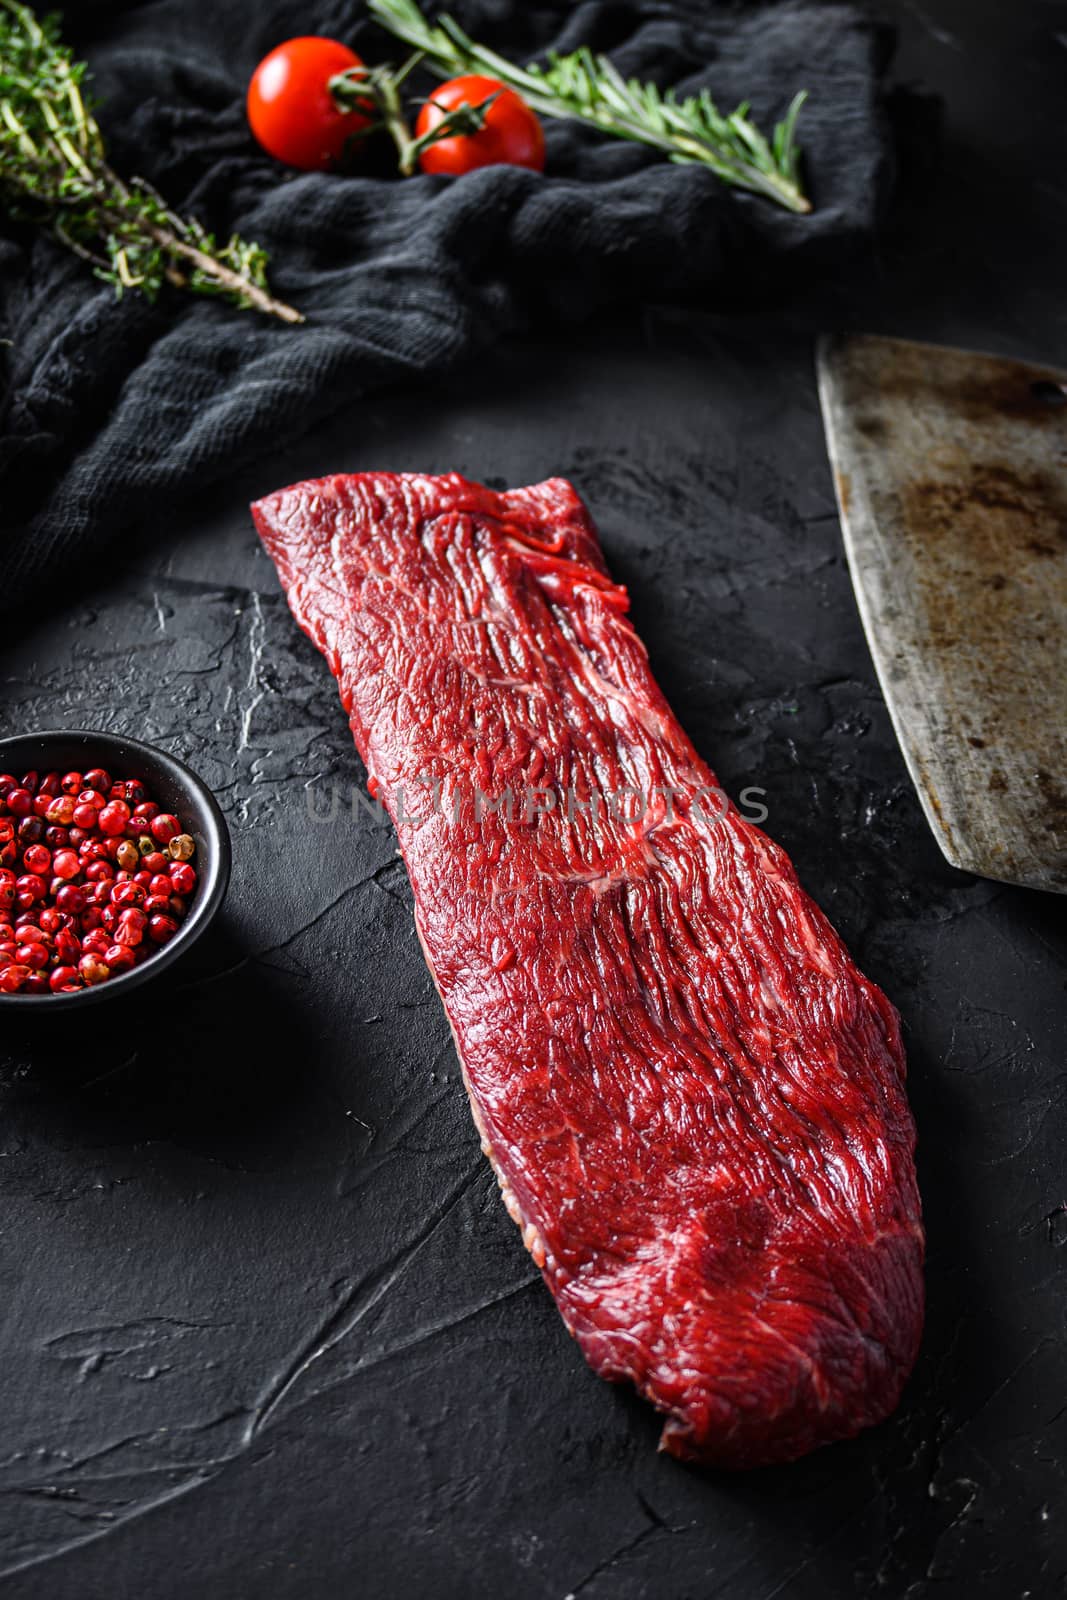 Raw triangle roast or tri tip, near butcher knife with pink pepper and rosemary. Black background. Close up side view selective focus.